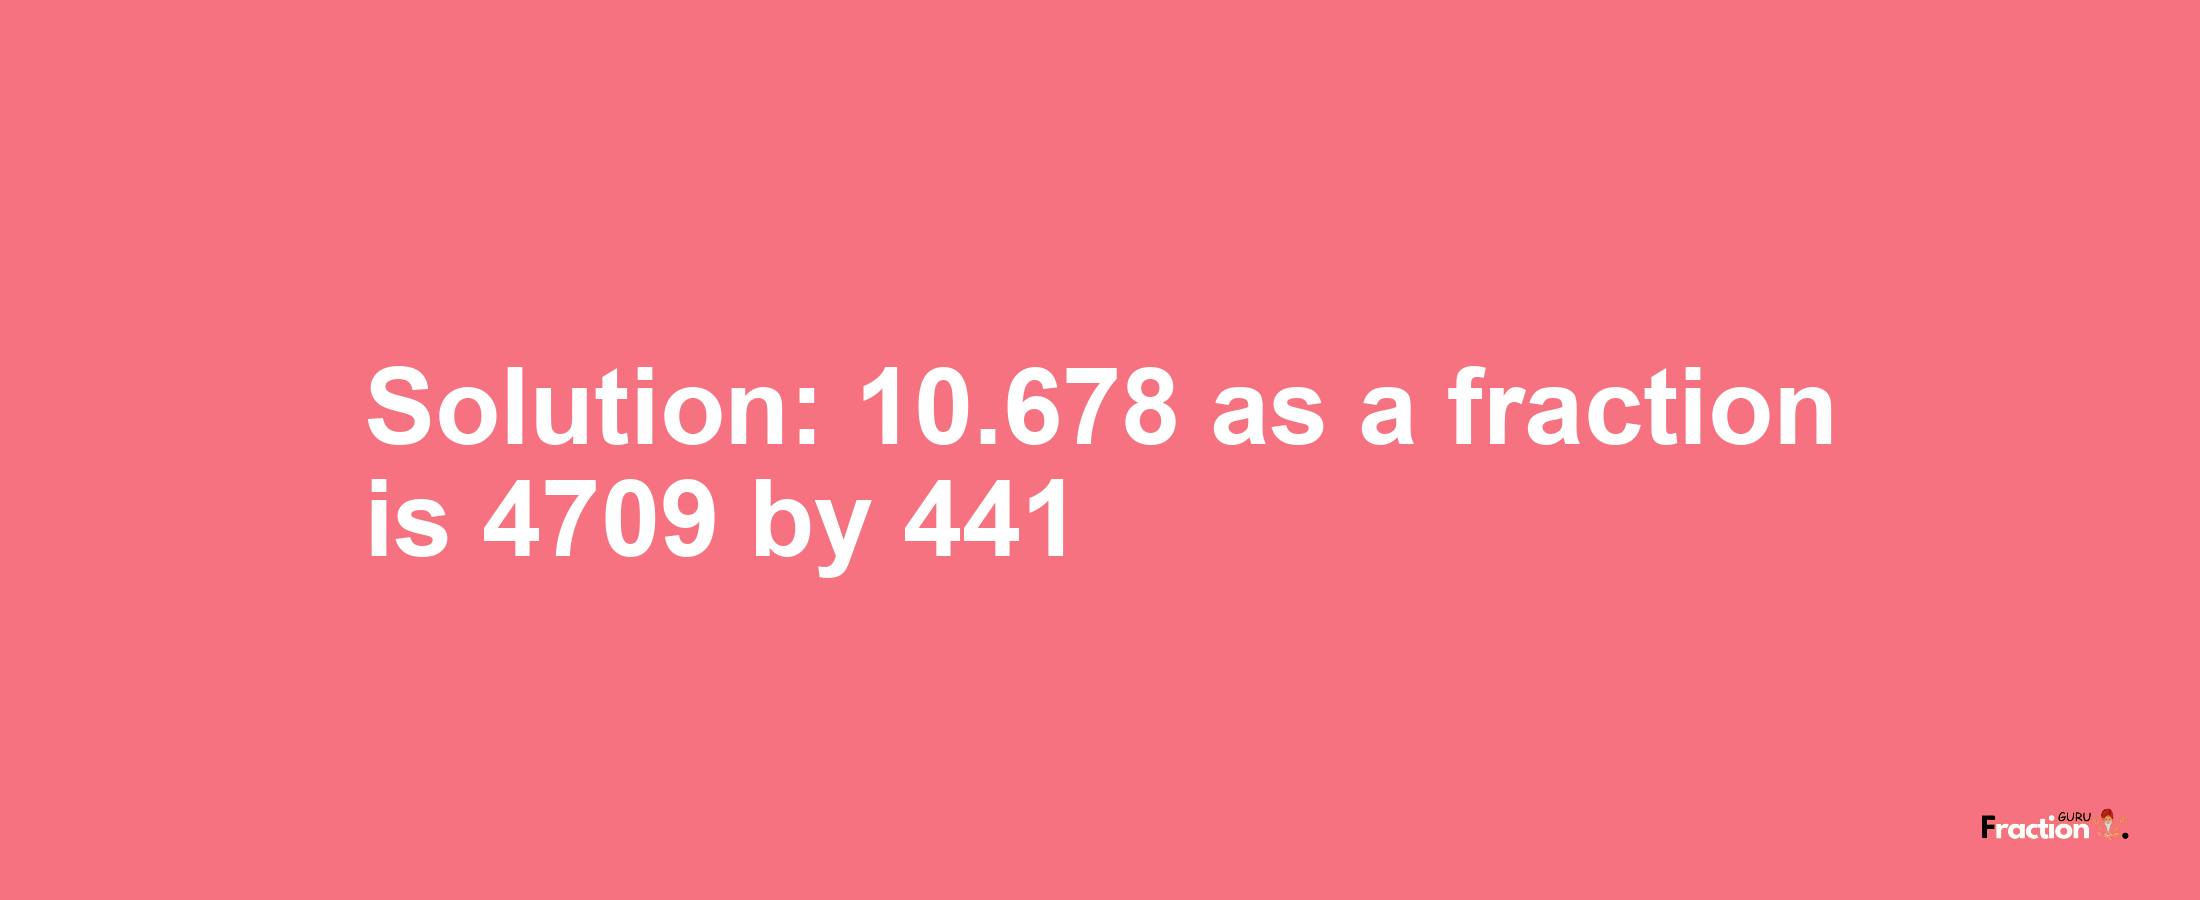 Solution:10.678 as a fraction is 4709/441